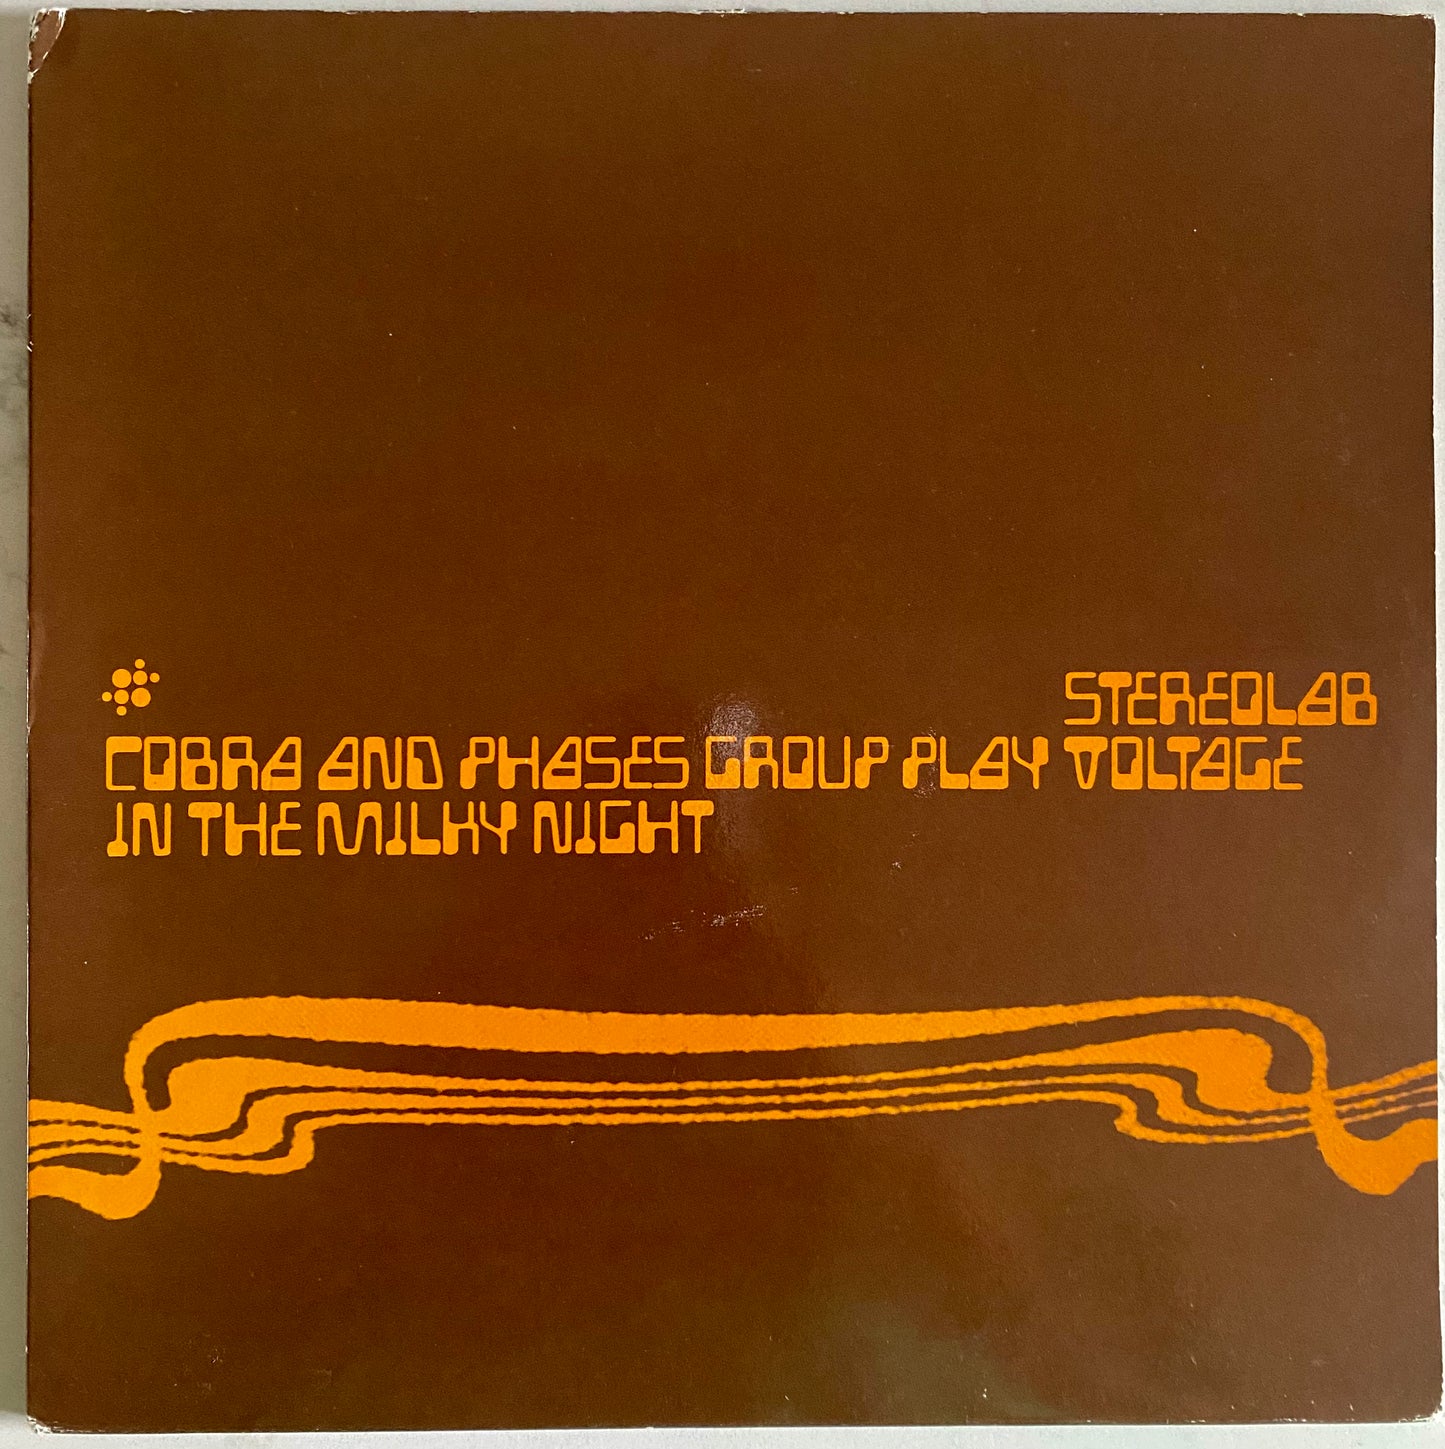 Stereolab - Cobra And Phases Group Play Voltage In The Milky Night (2xLP, Album, Ltd) ROCK ELECTRONIC